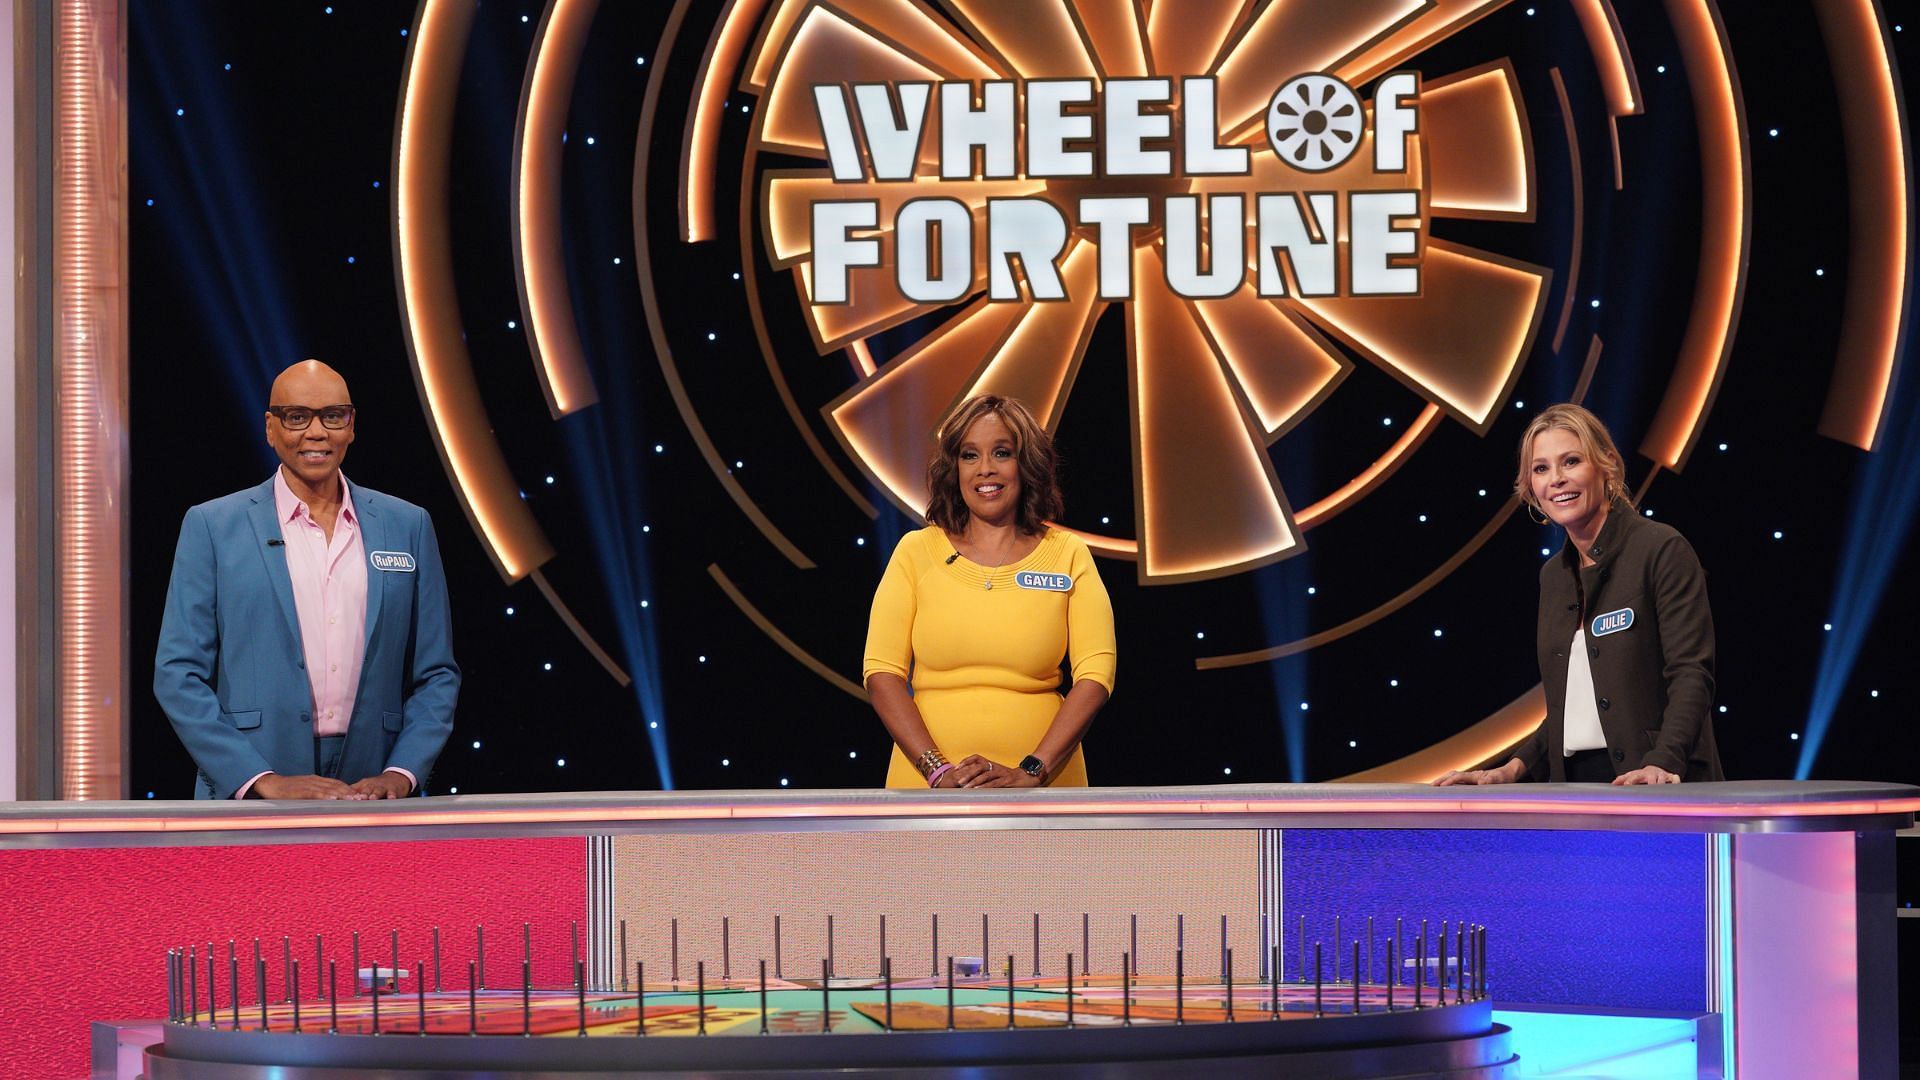 Celebrity Wheel of Fortune airs a new episode this Sunday